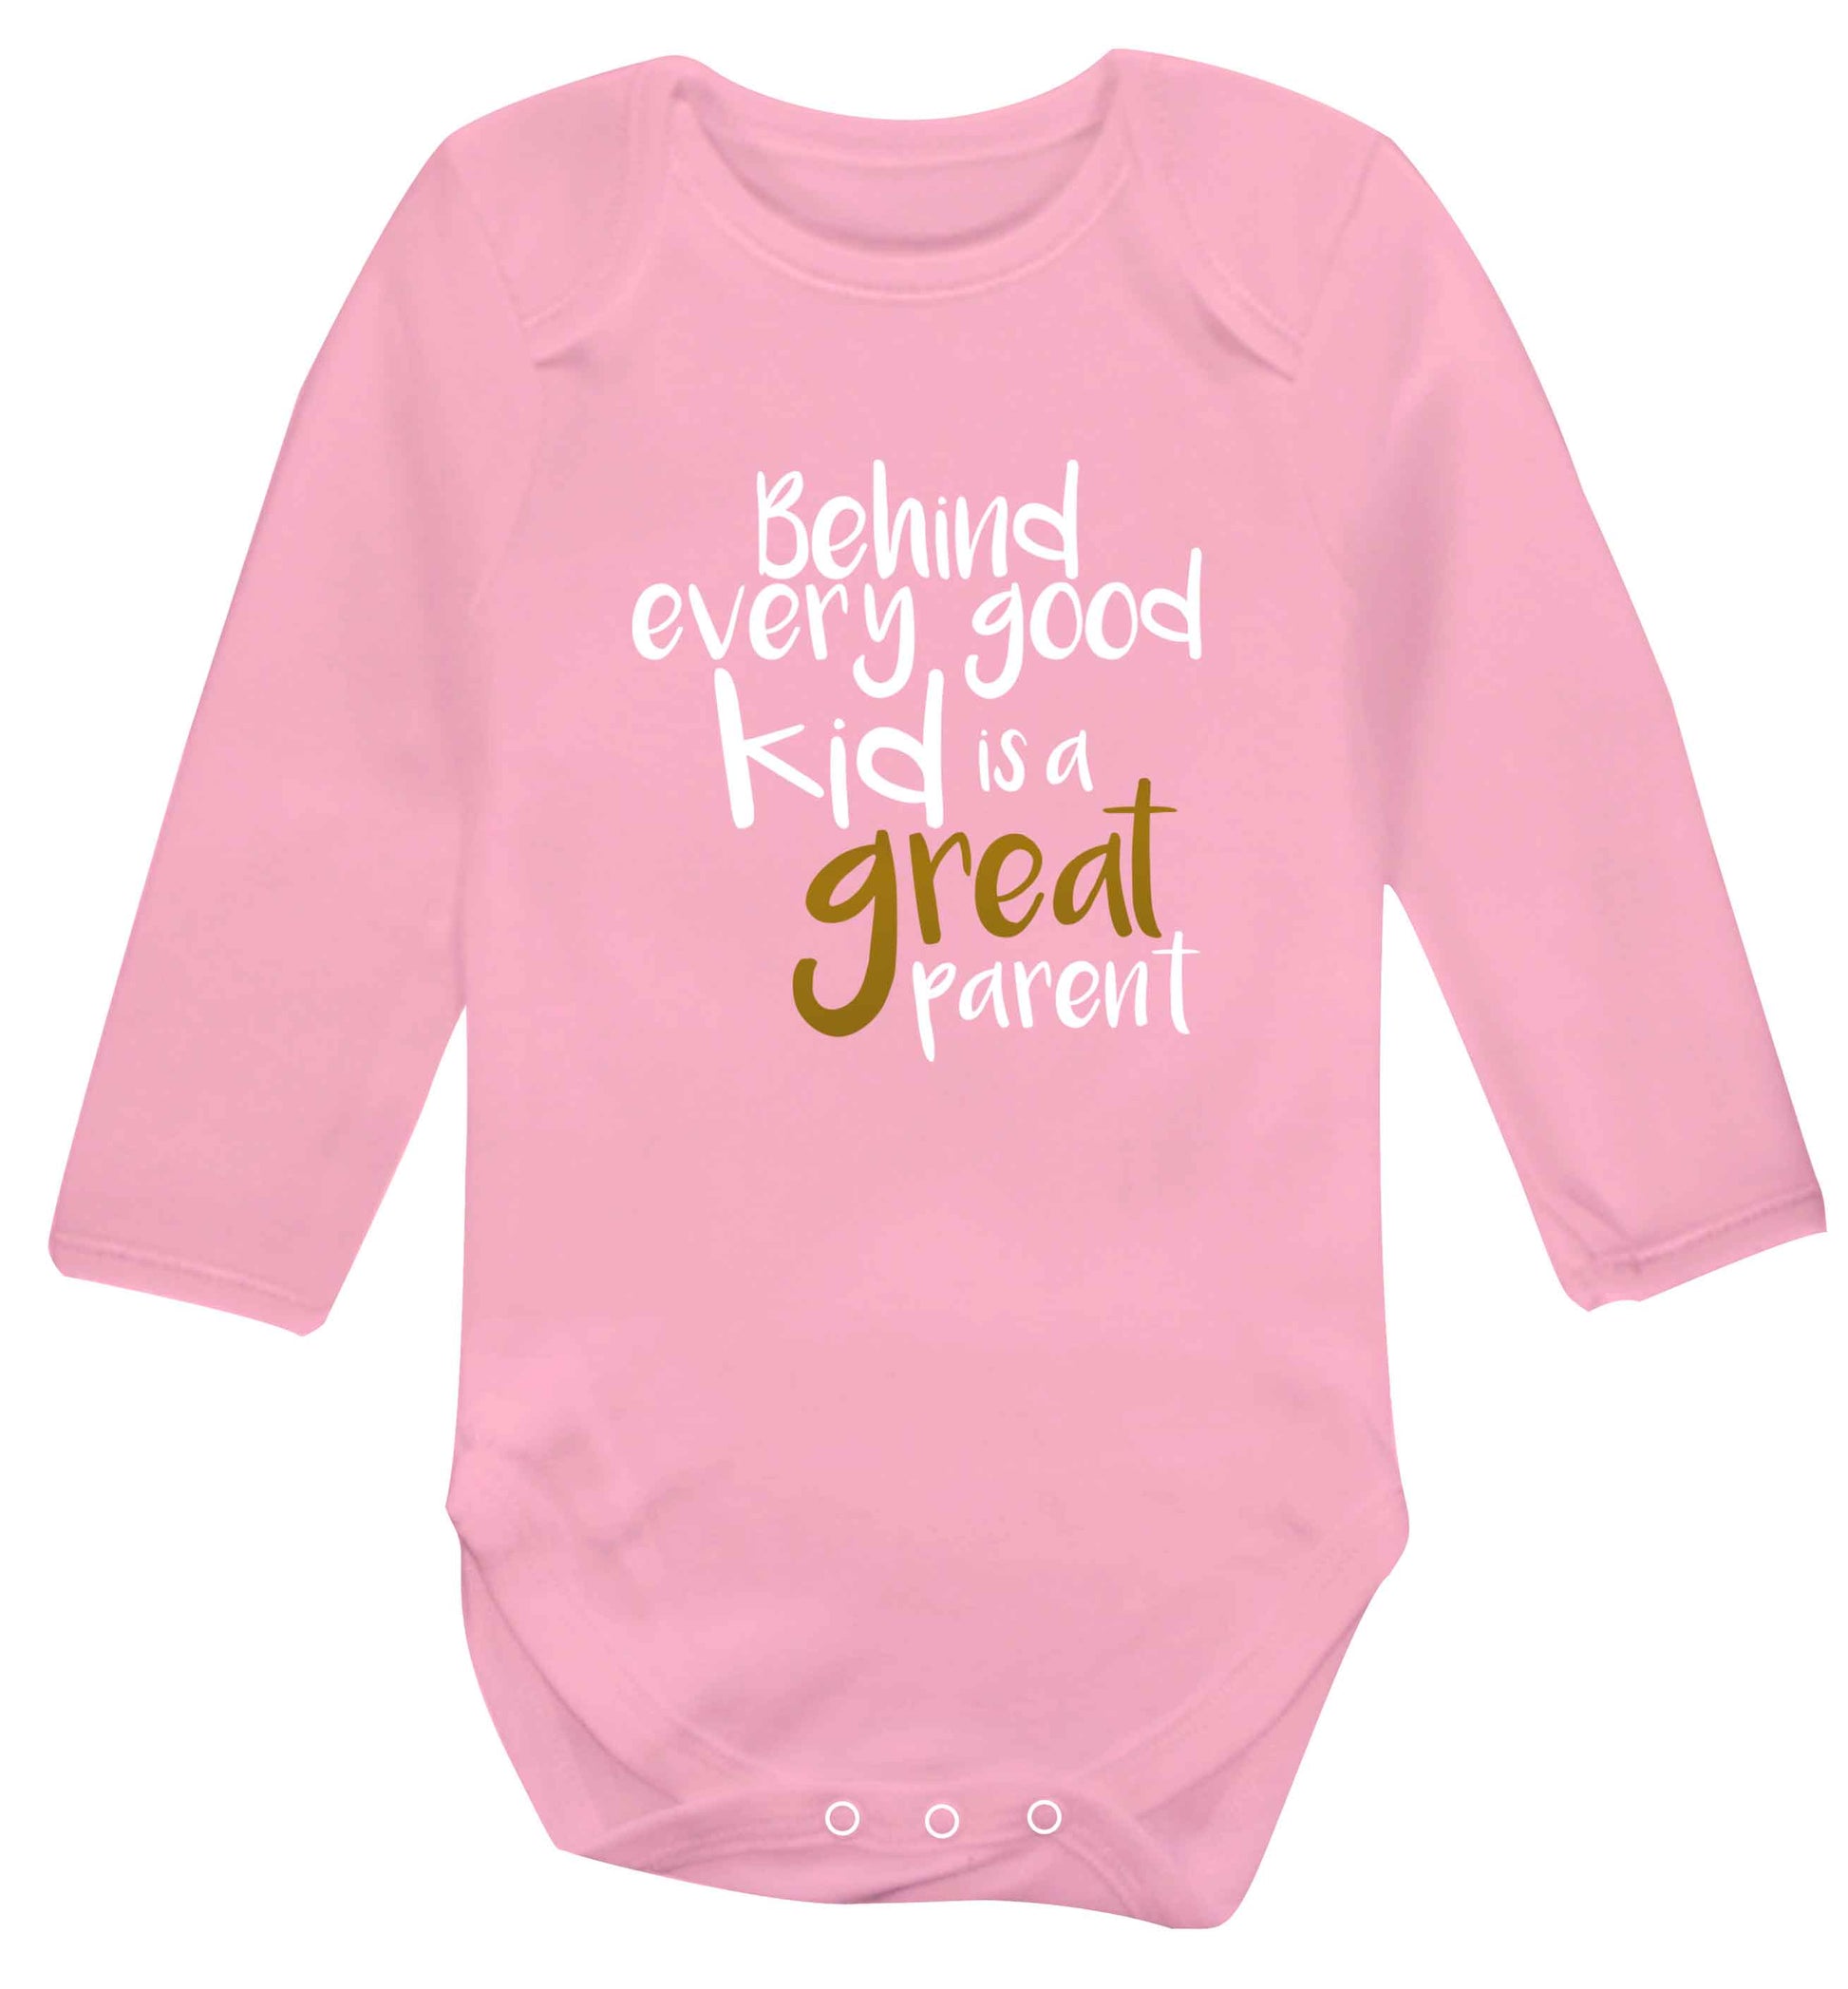 Behind every good kid is a great parent baby vest long sleeved pale pink 6-12 months